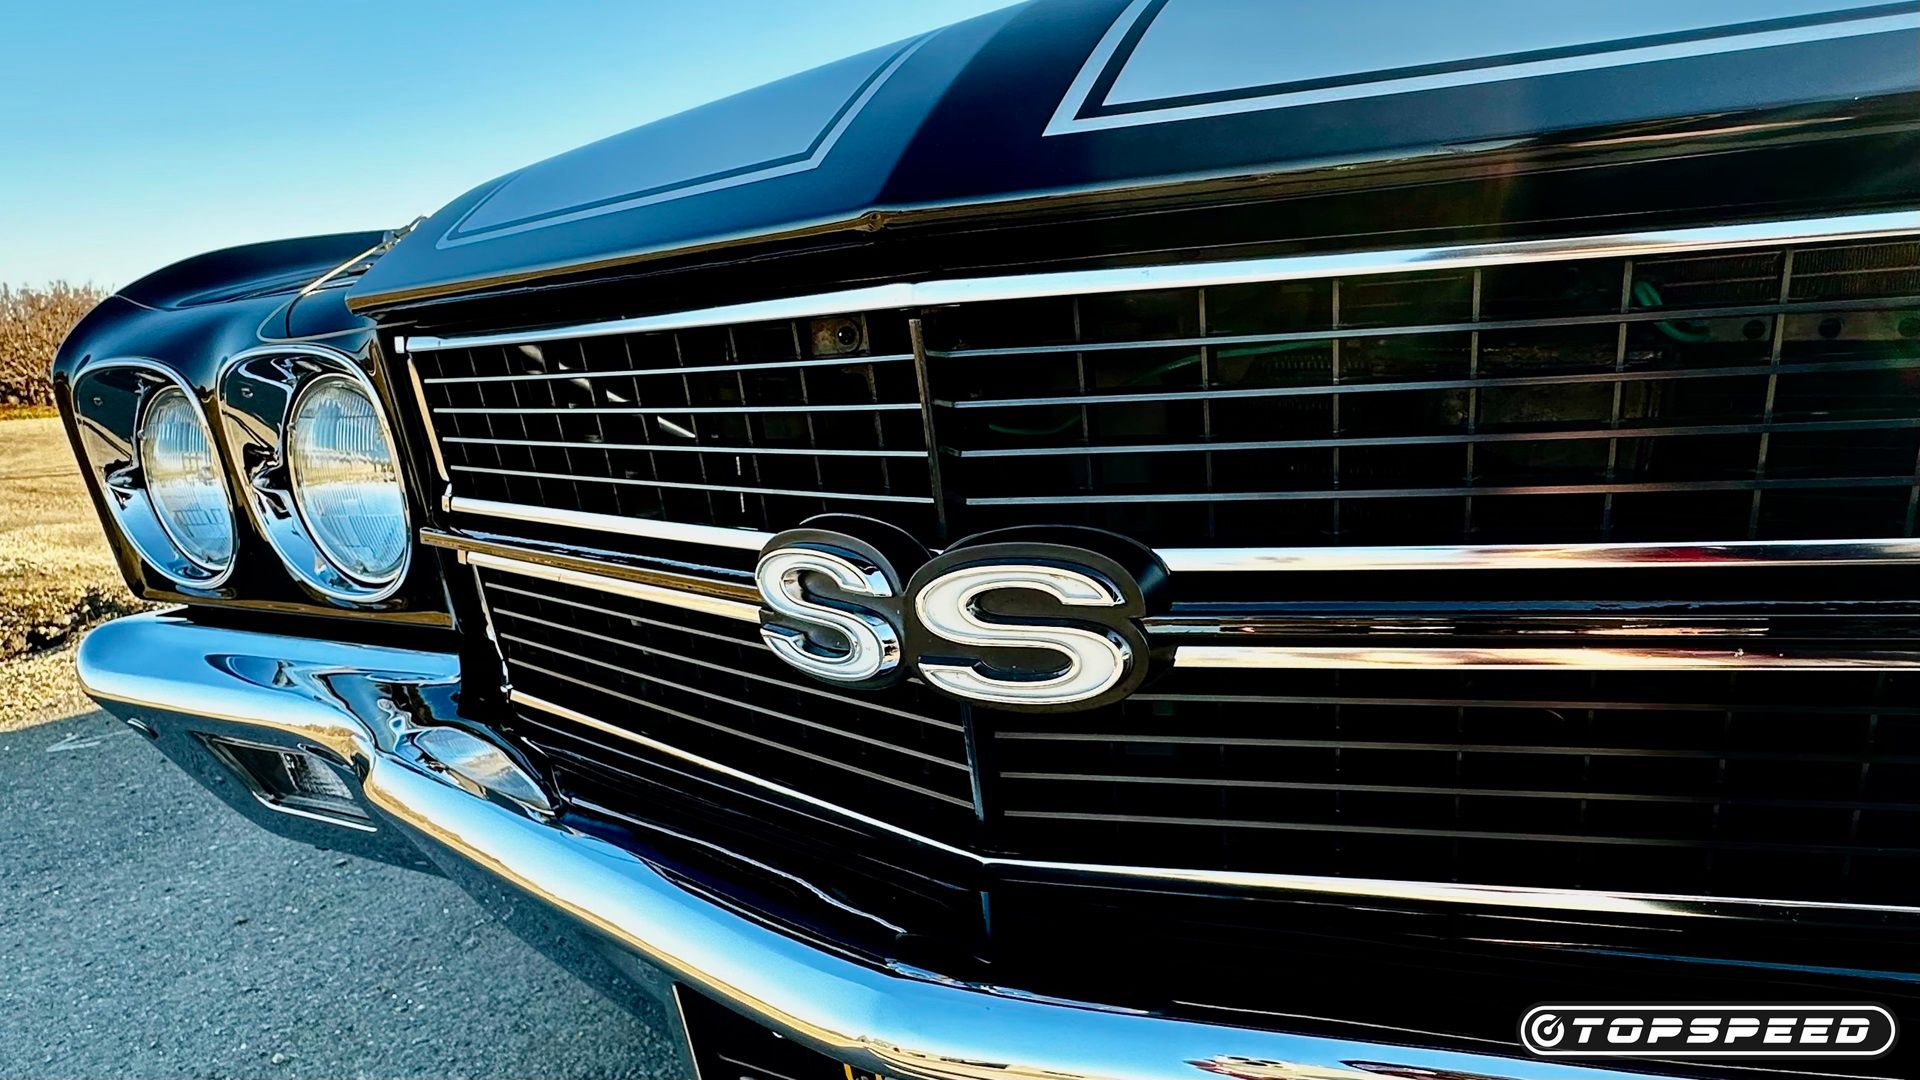 Black Convertible 1970 Chevy Chevelle SS Grille Close Up